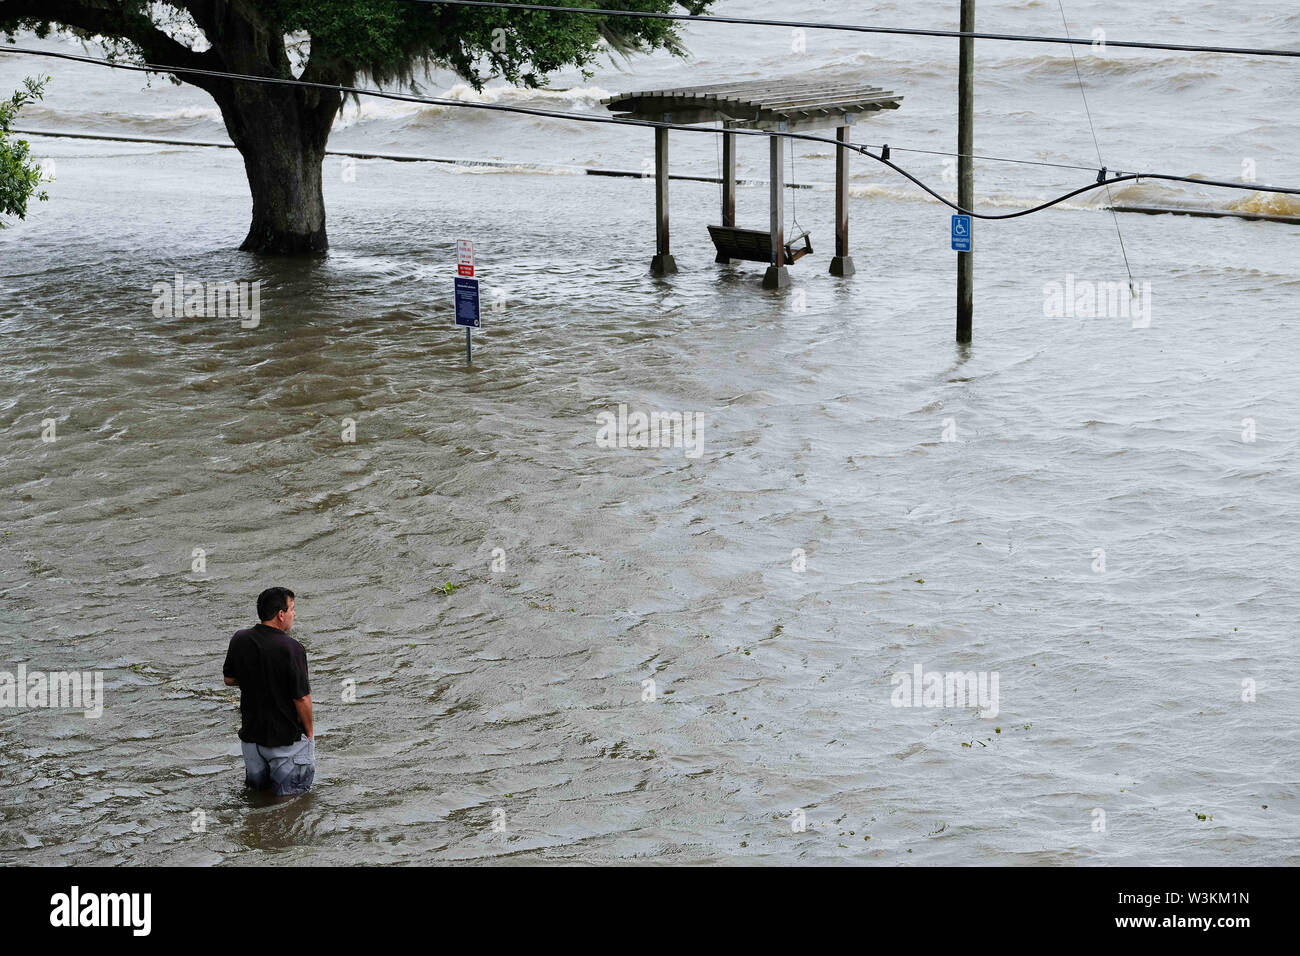 July 13, 2019 - Mandeville, LOUISIANA, U.S - Chris Ladner looks out at a flooded area next to Lake Pontchartrain in Mandeville, Louisiana USA as Hurricane Barry makes landfall on July 13, 2019. (Credit Image: © Dan Anderson/ZUMA Wire) Stock Photo